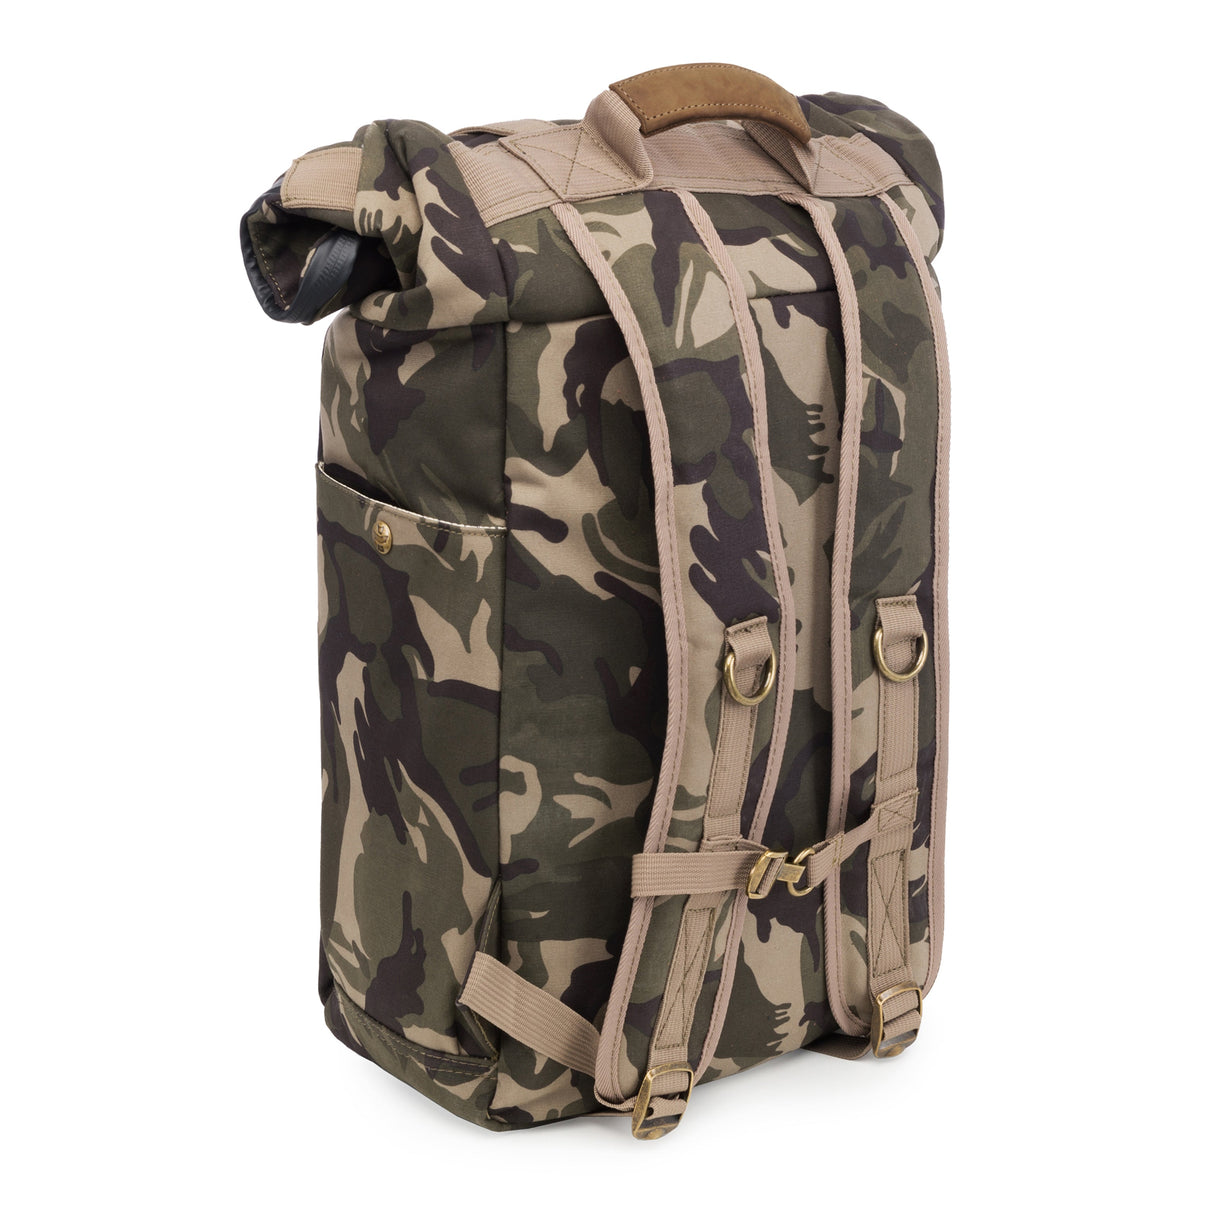 Revelry Supply 'The Drifter' Smell Proof Rolltop Backpack in Camouflage - Side View